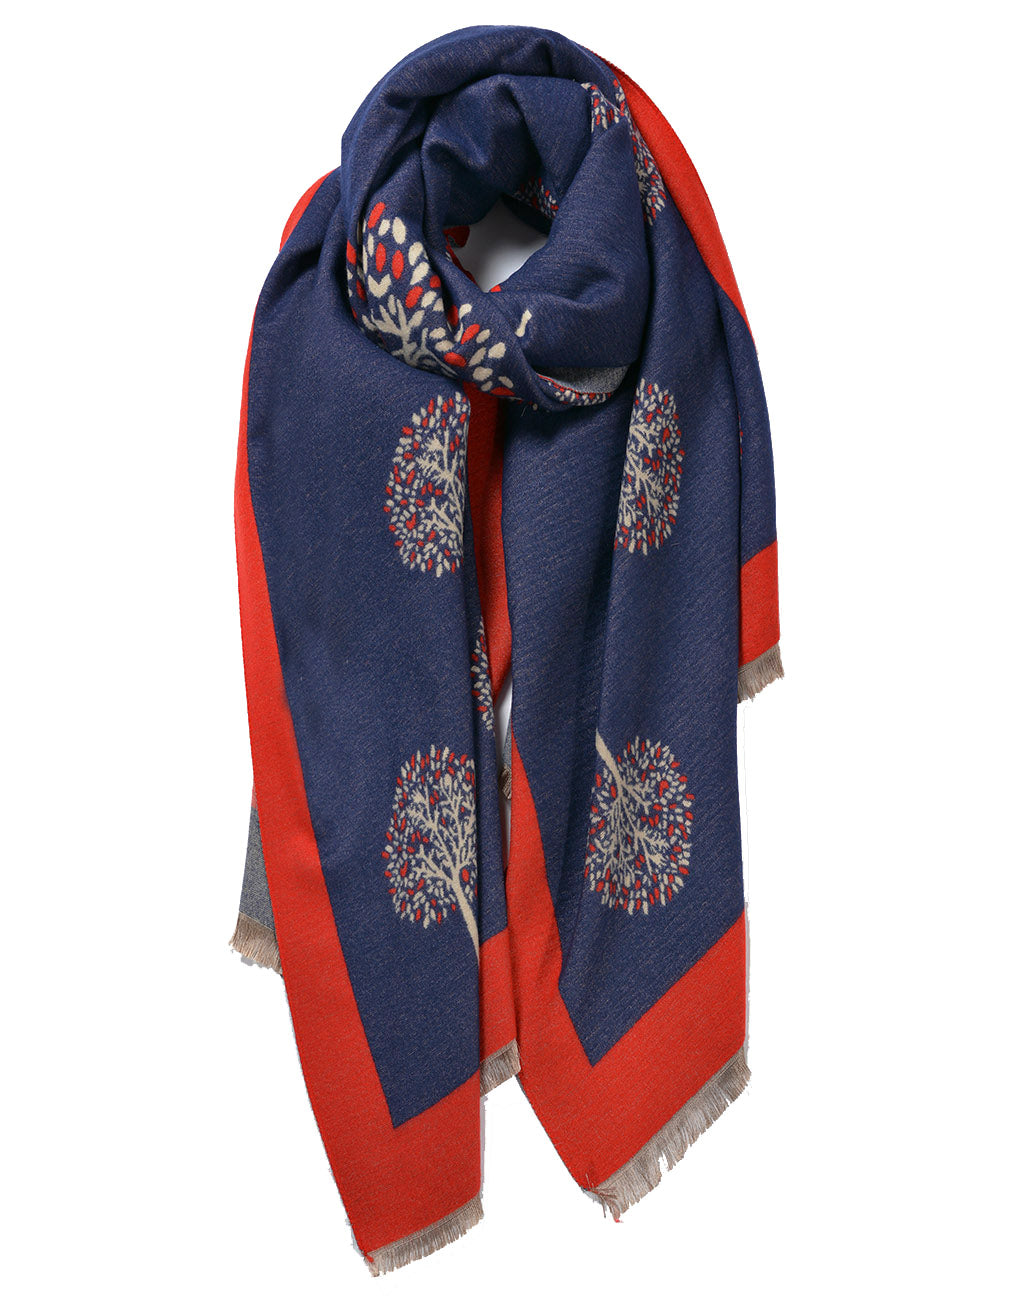 New Tree Of Life Cashmere Scarf